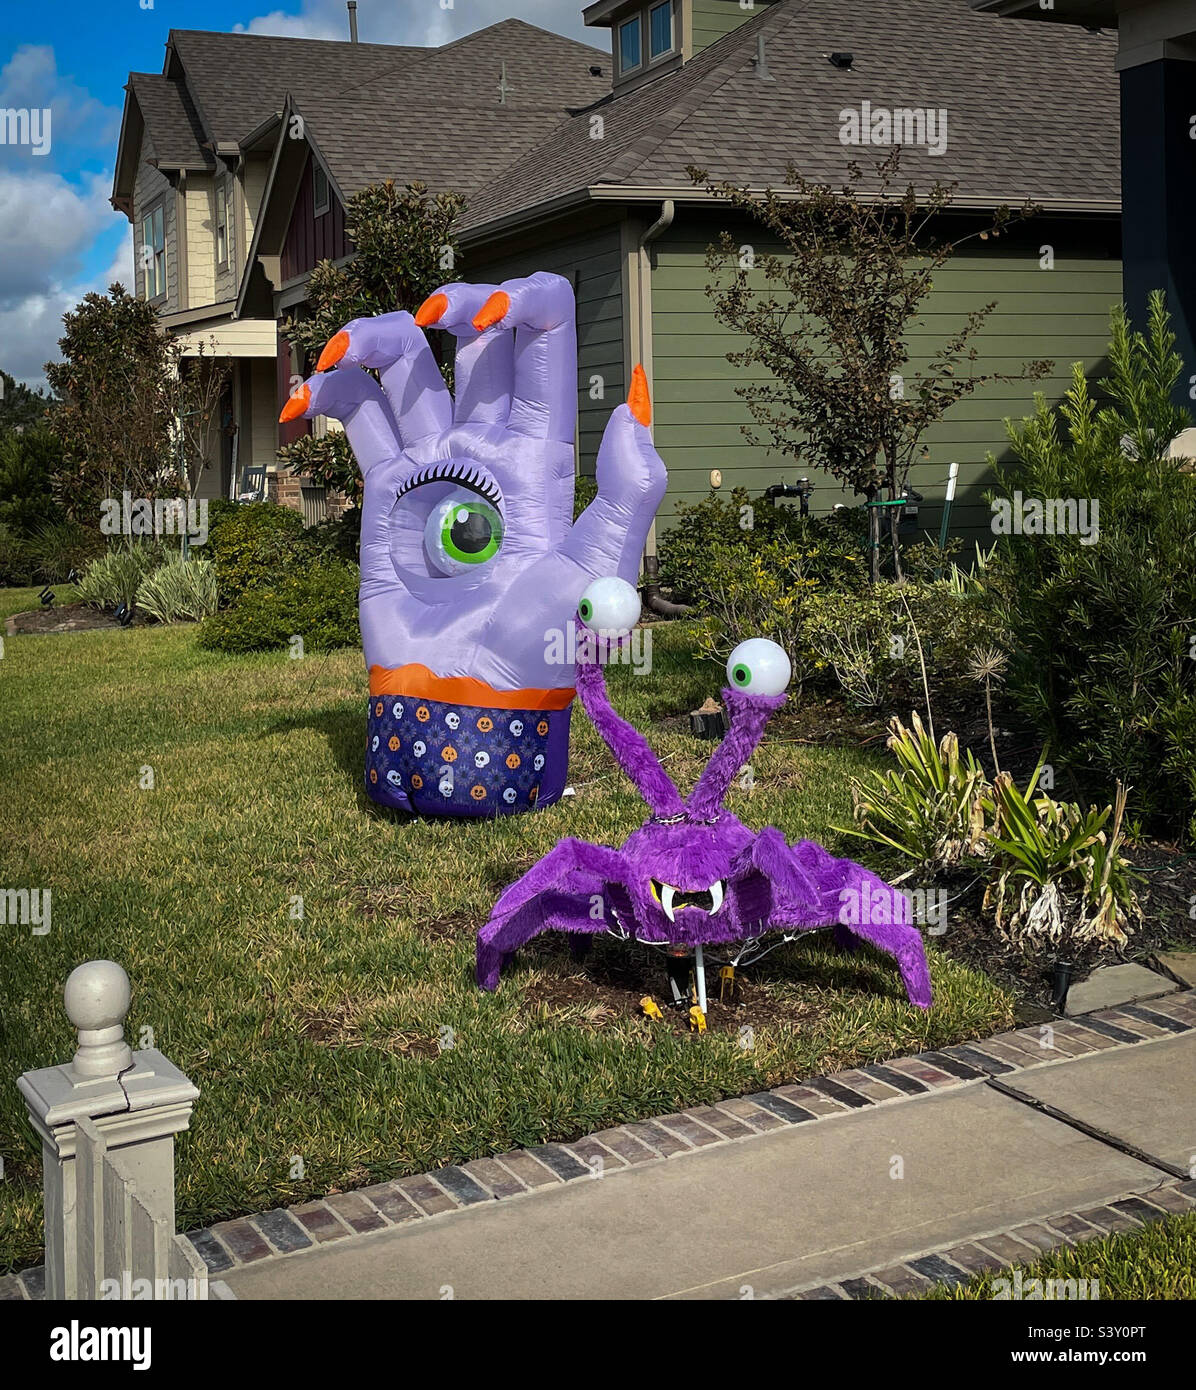 Scary spooky fuzzy big purple spider with fangs and googly eyes and huge hand with single green eye in center and long orange fingernails Halloween yard decorations Stock Photo